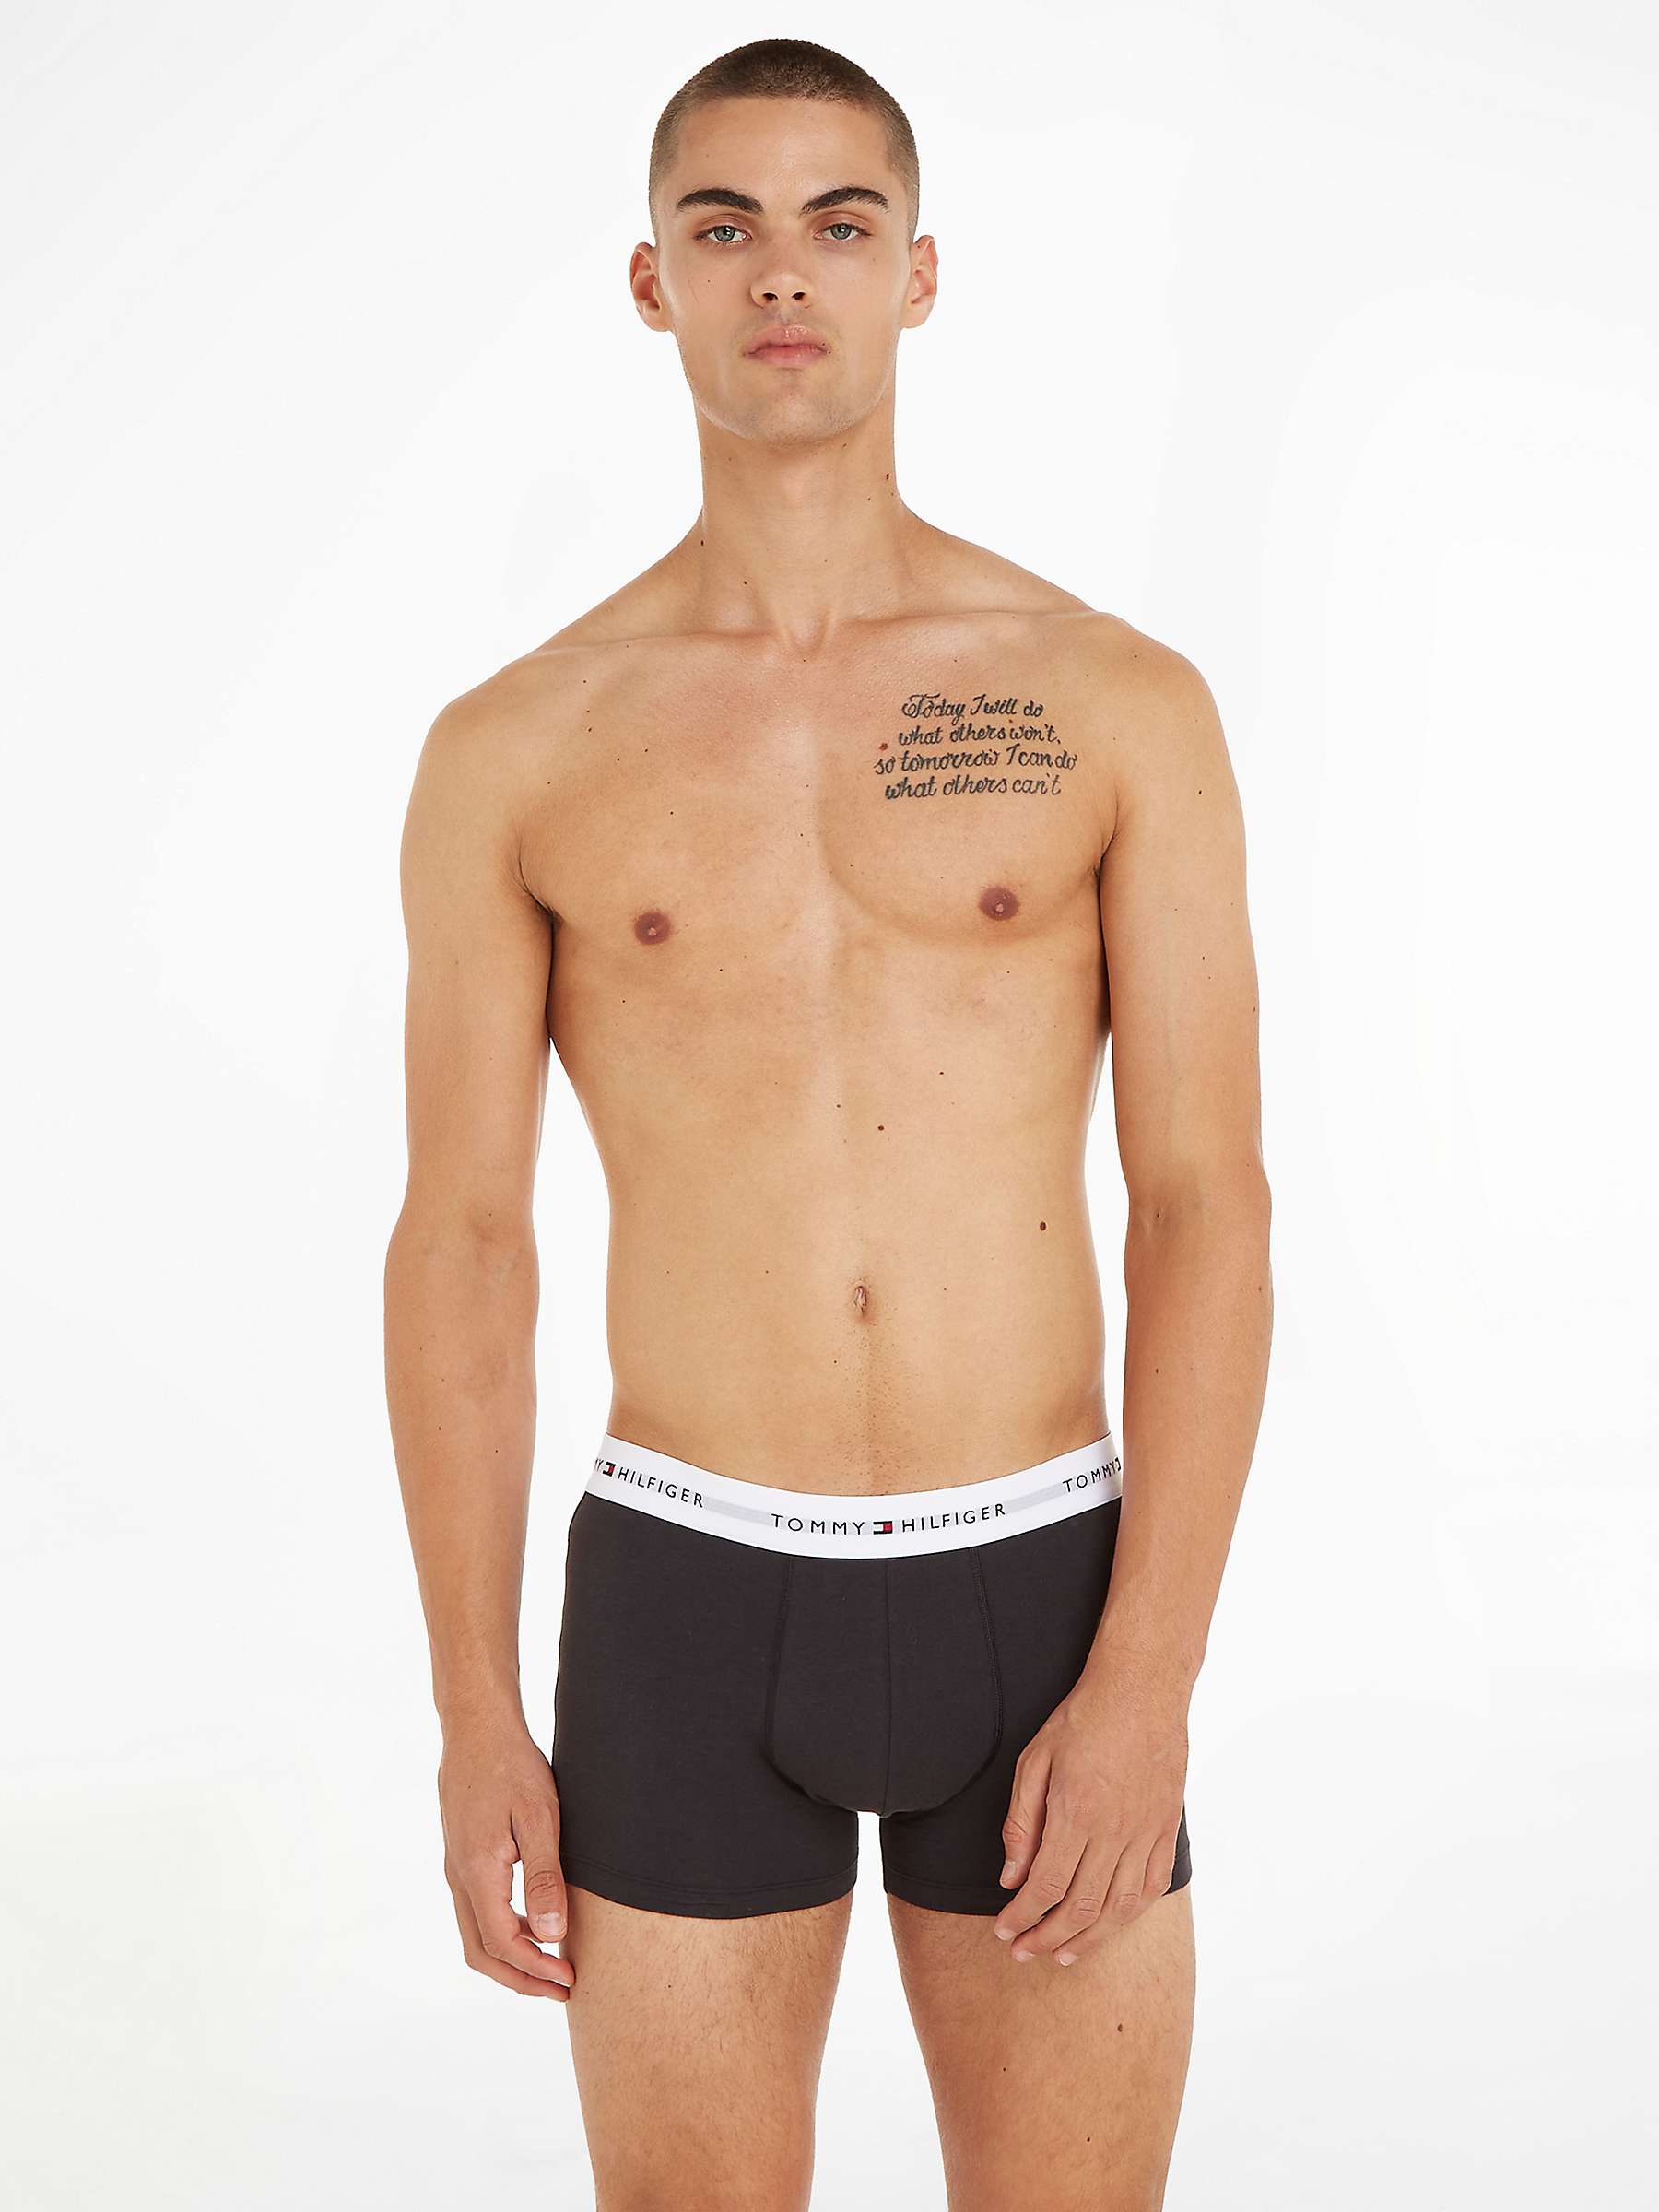 Buy Tommy Hilfiger Essential Logo Waistband Trunks, Pack of 3, Grey/Black/White Online at johnlewis.com